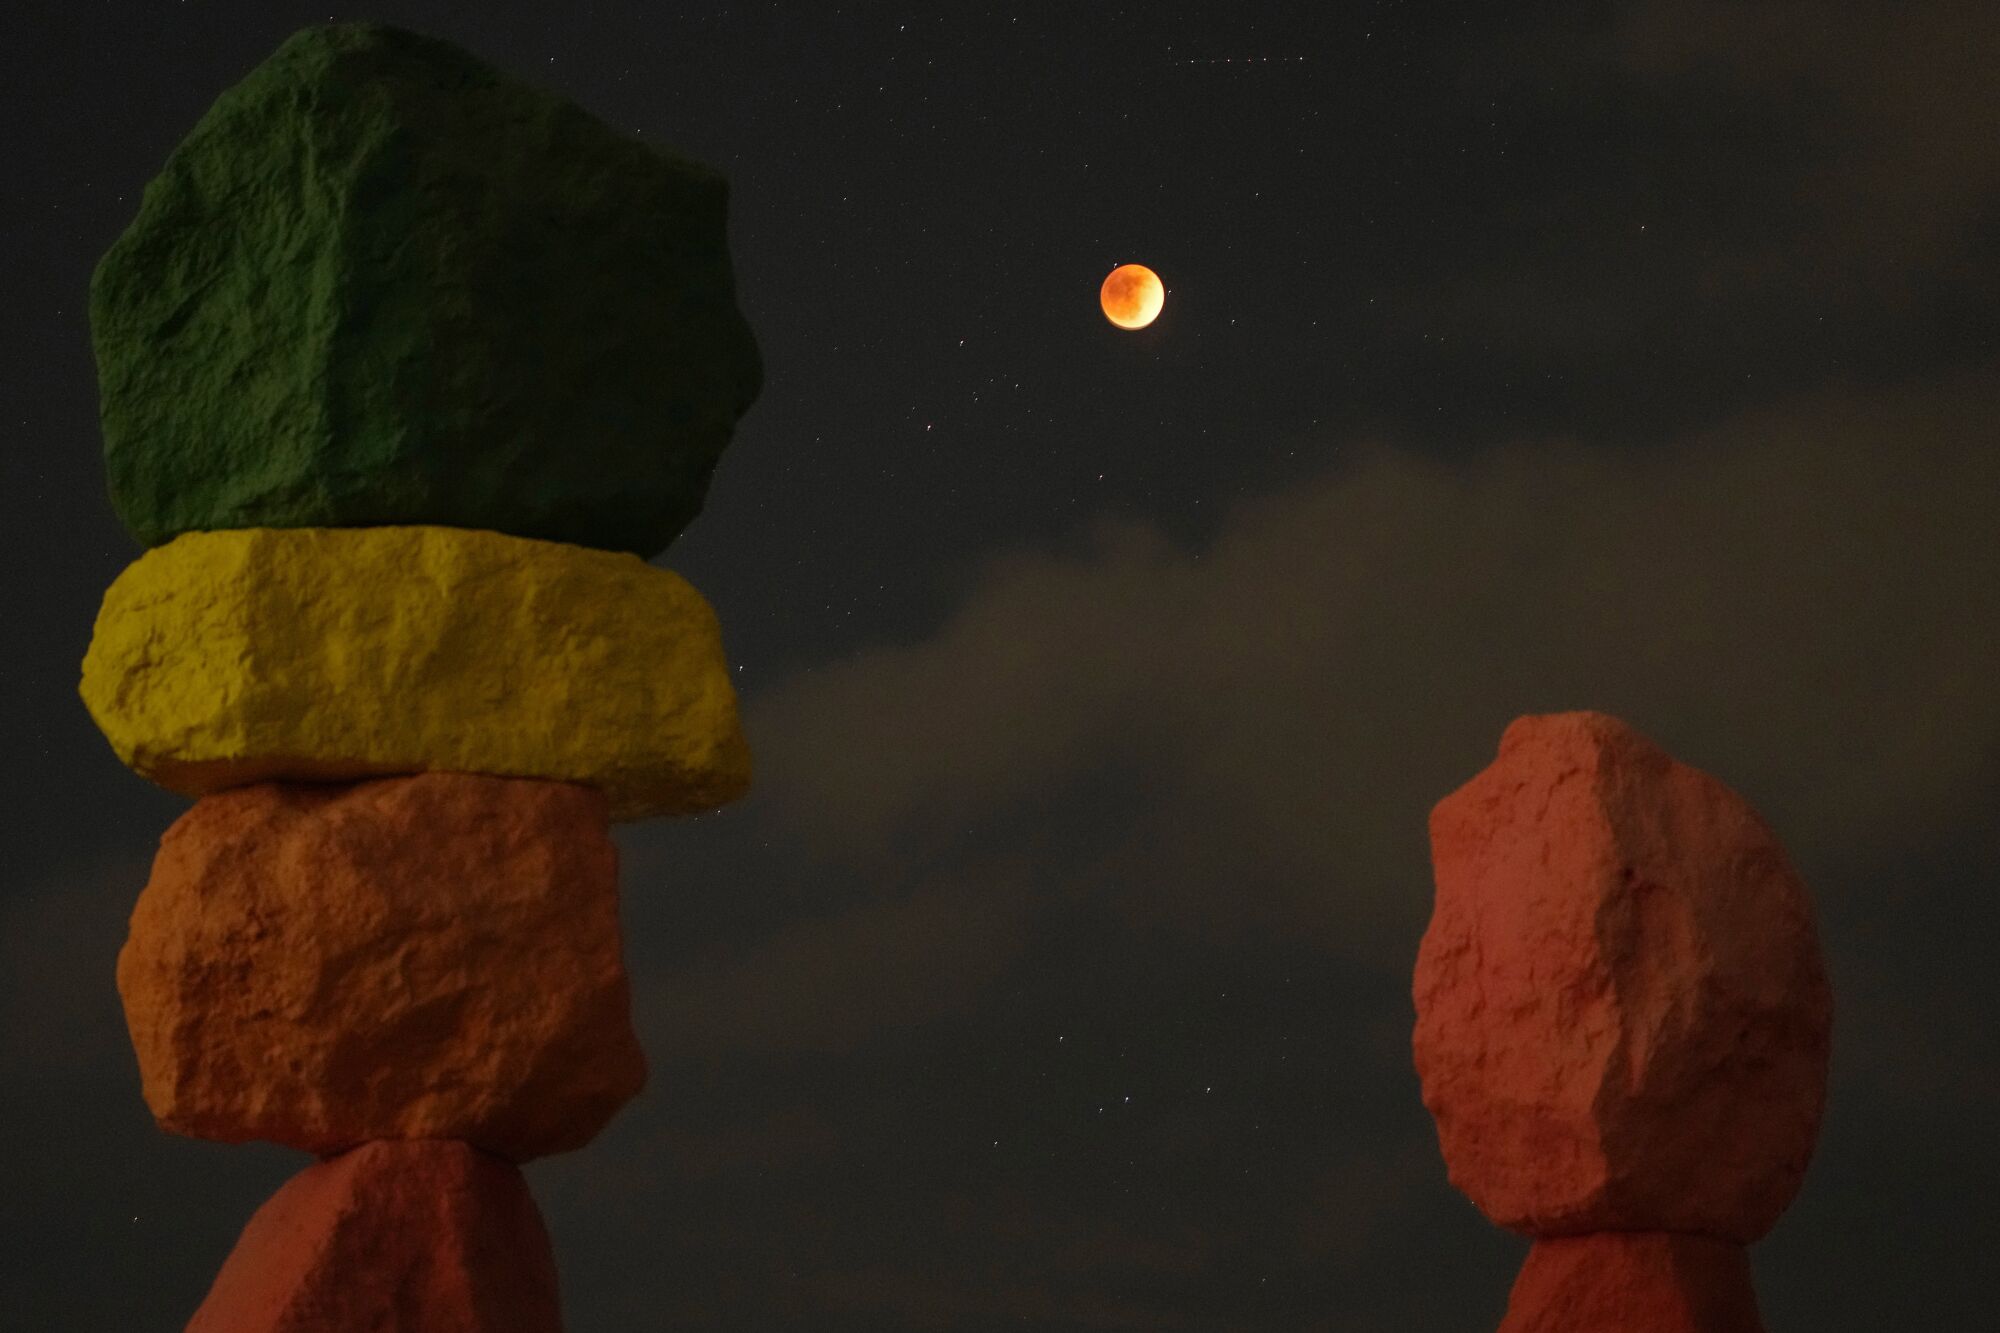 Stacks of painted rocks next to an eclipsed full moon